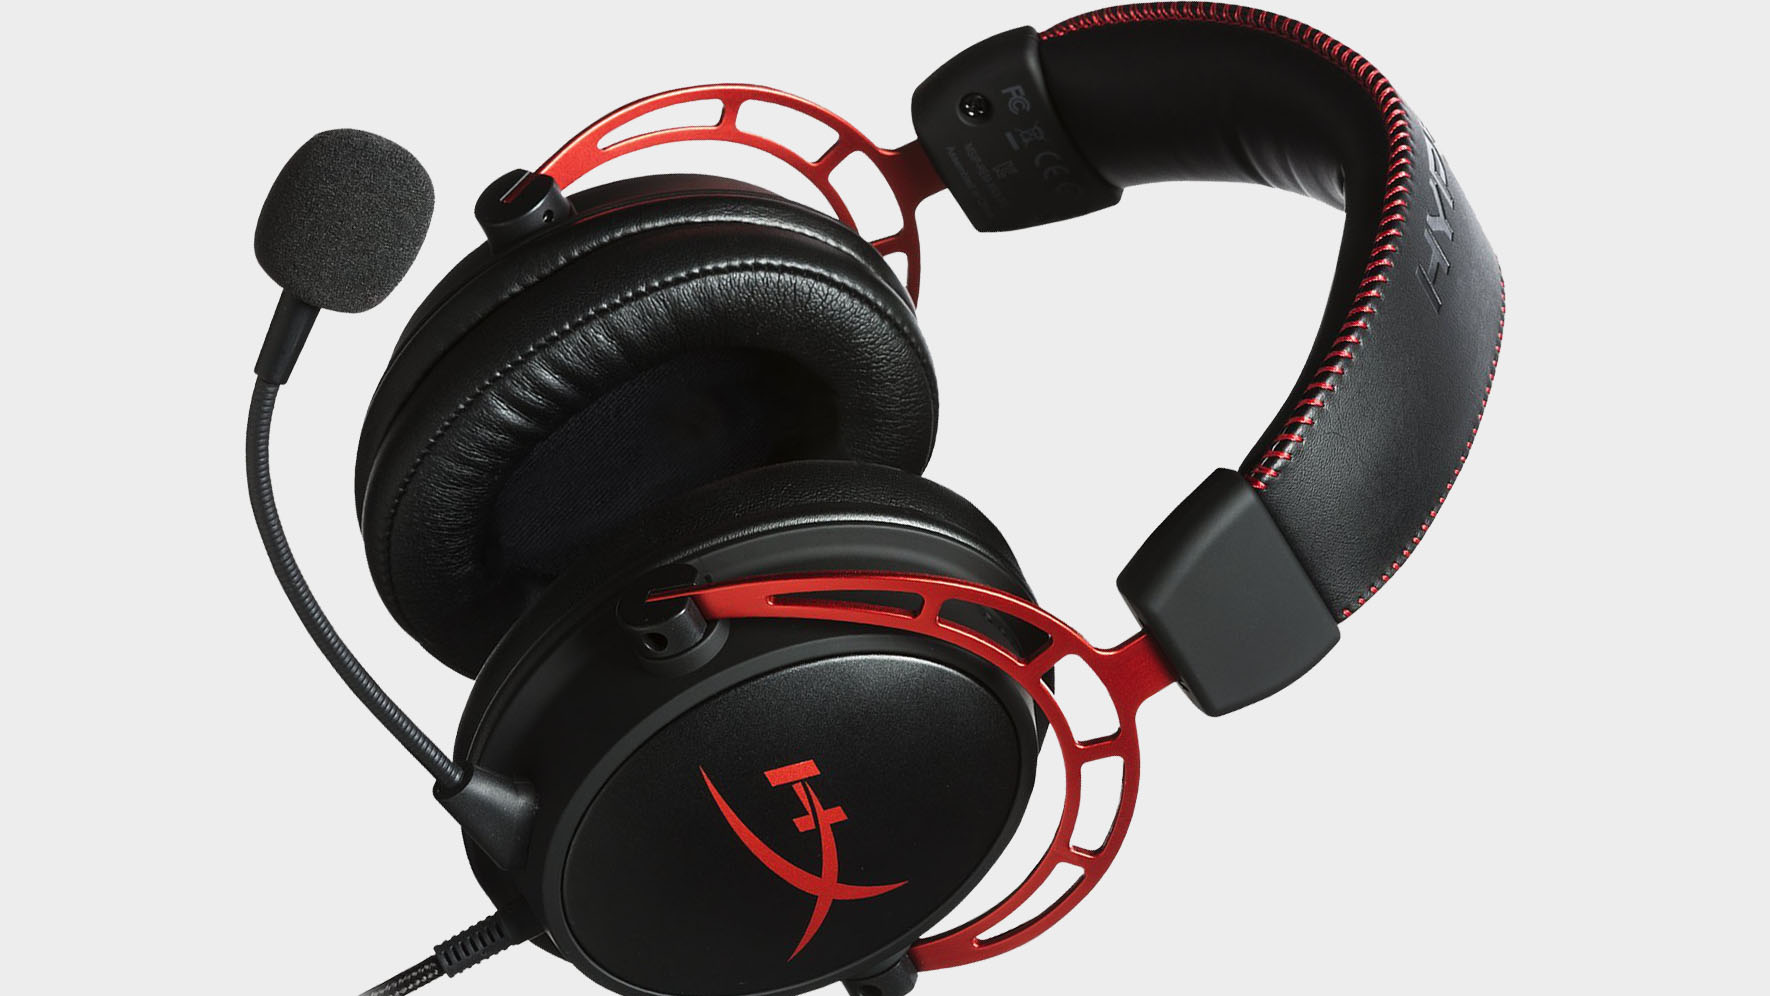 Steelseries Arctis Pro Gamedac Versus Hyperx Cloud Alpha Which One Should You Buy Pc Gamer